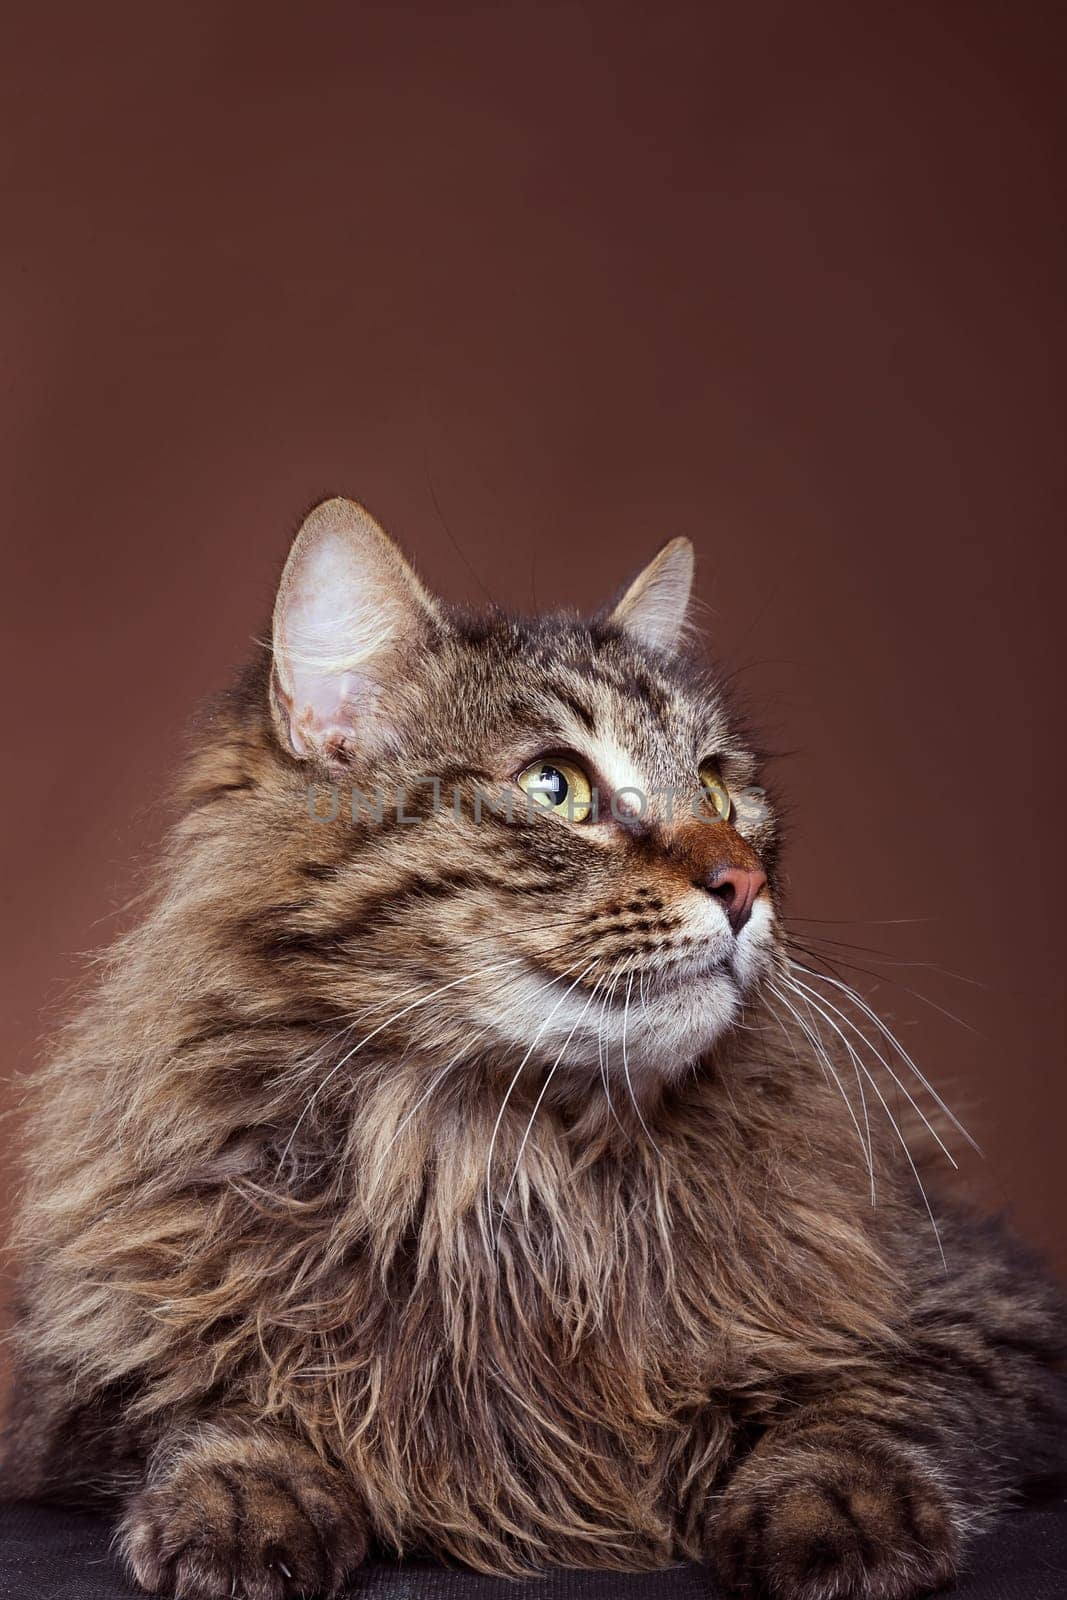 Cat in studio looking away from camera on brown background by DCStudio